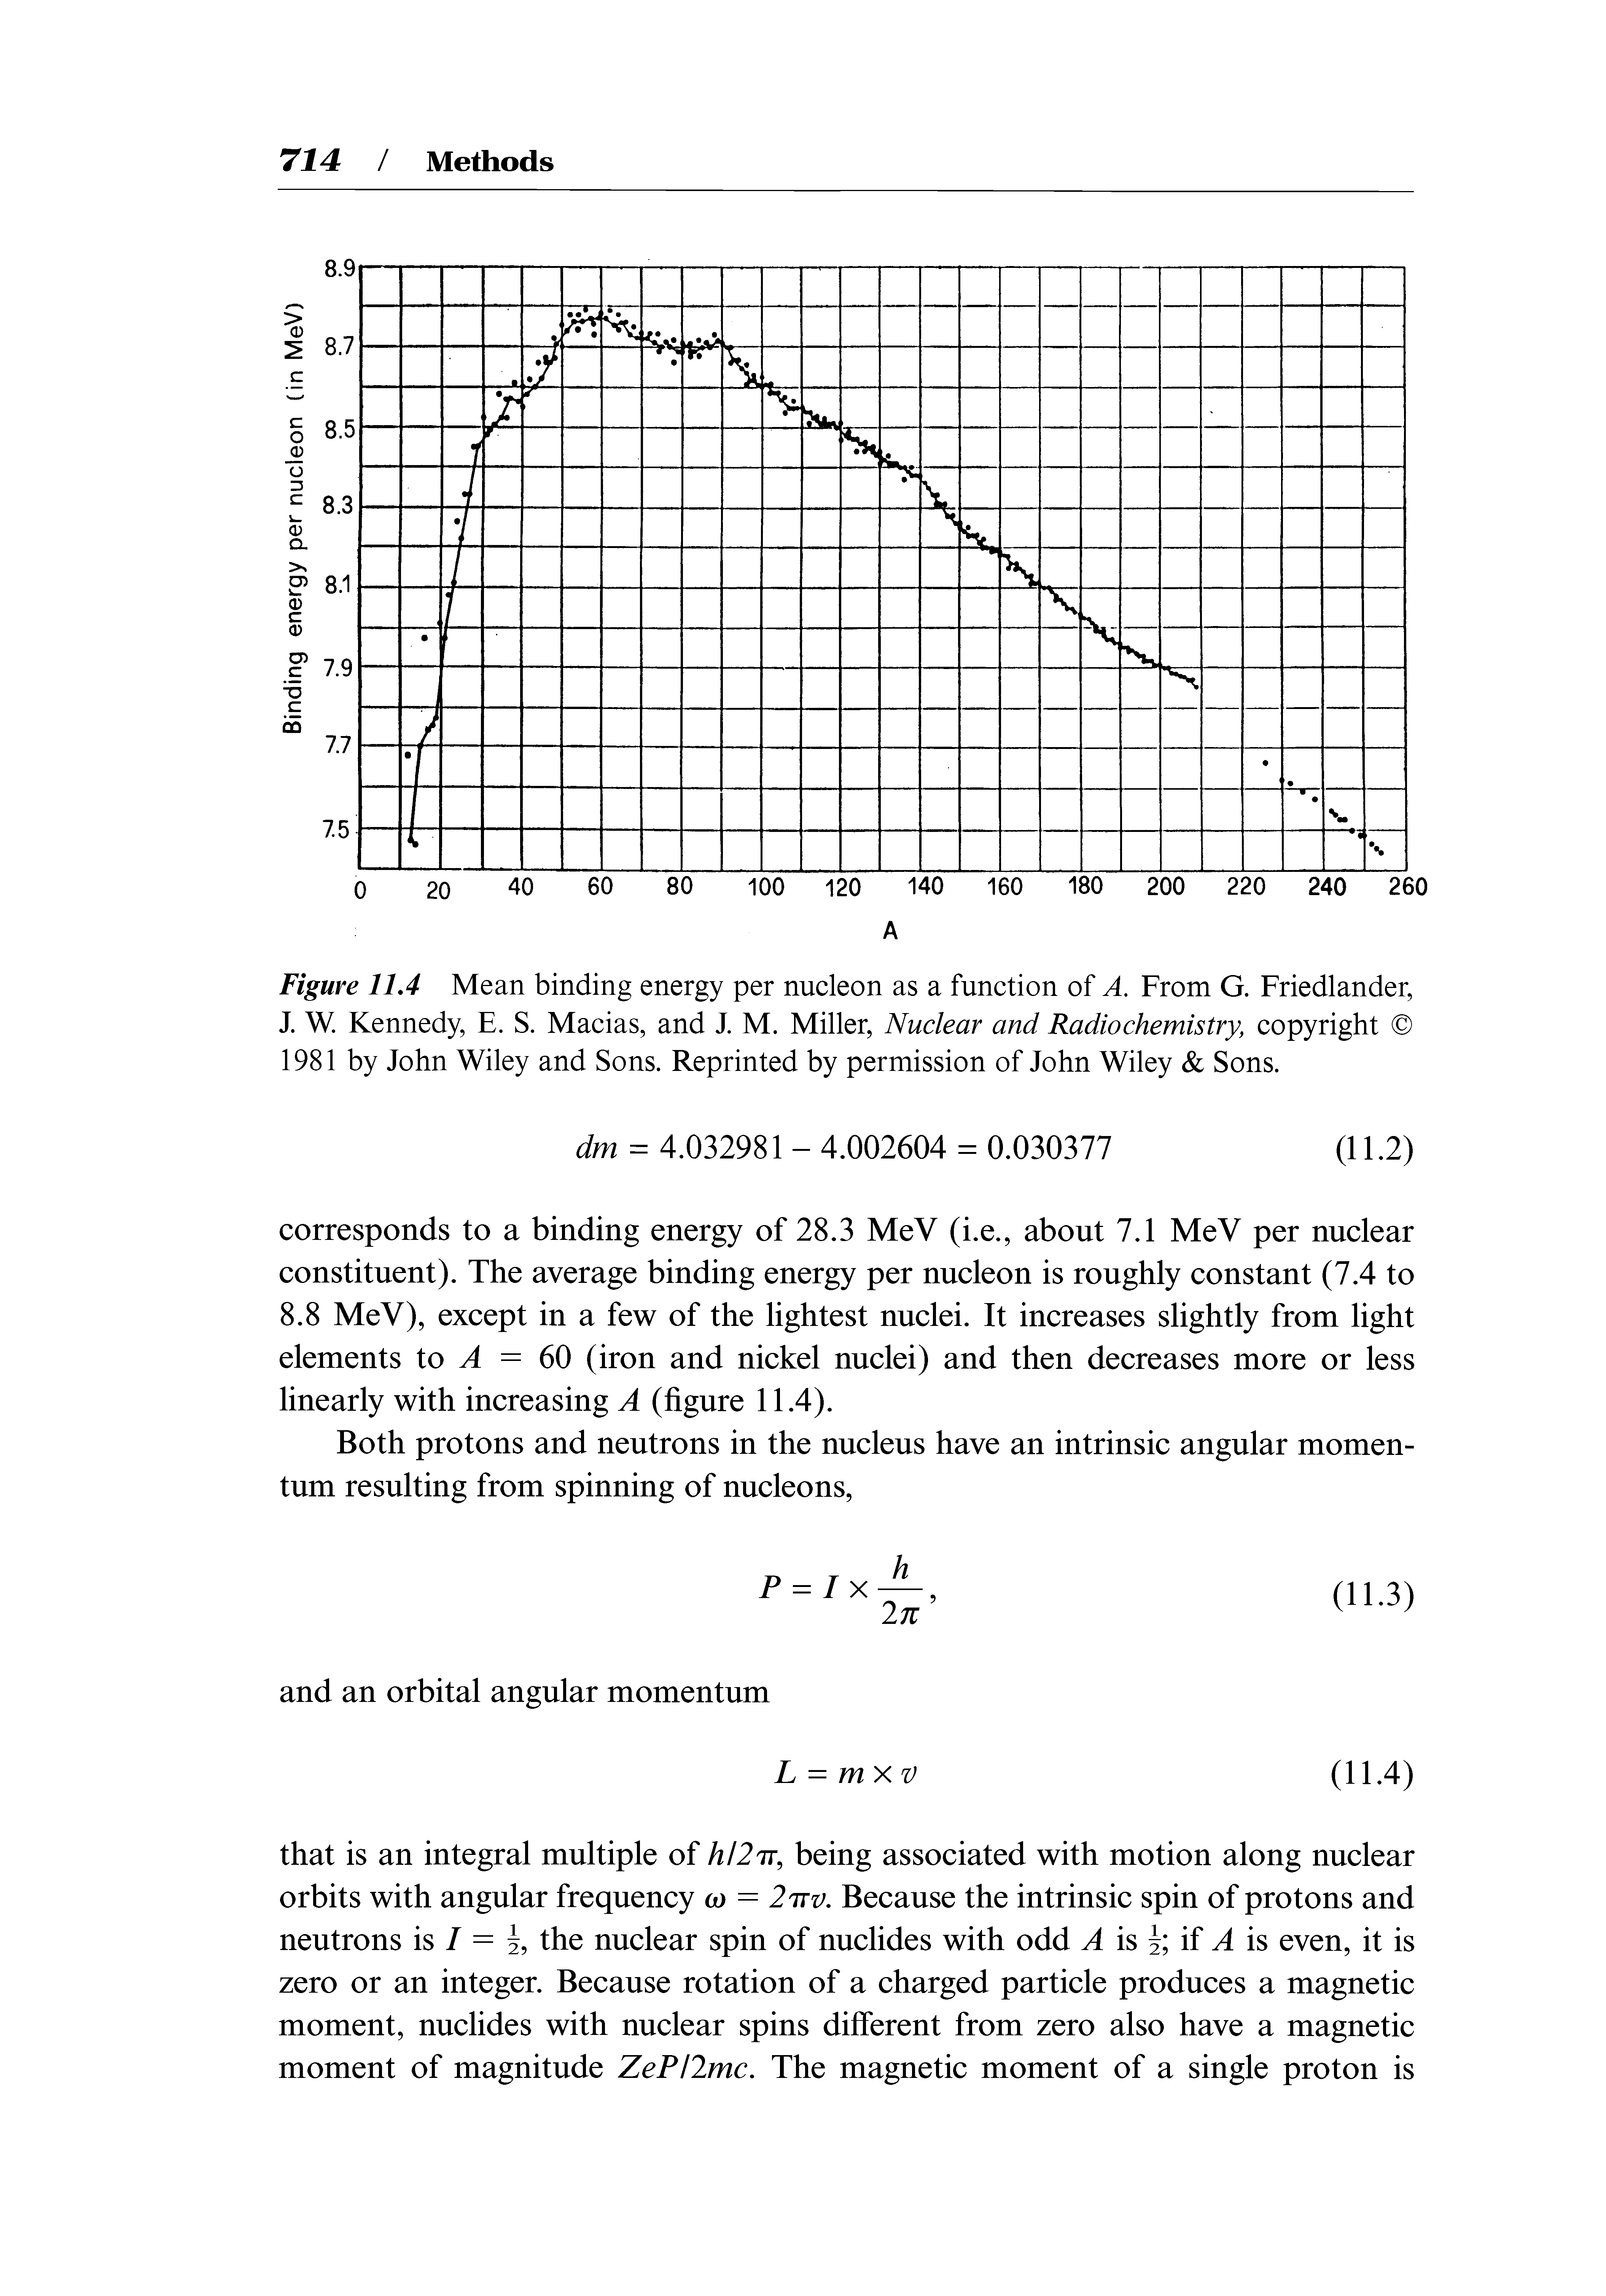 Figure 11.4 Mean binding energy per nucleon as a function of A. From G. Friedlander, J. W. Kennedy, E. S. Macias, and J. M. Miller, Nuclear and Radio chemistry, copyright 1981 by John Wiley and Sons. Reprinted by permission of John Wiley Sons.